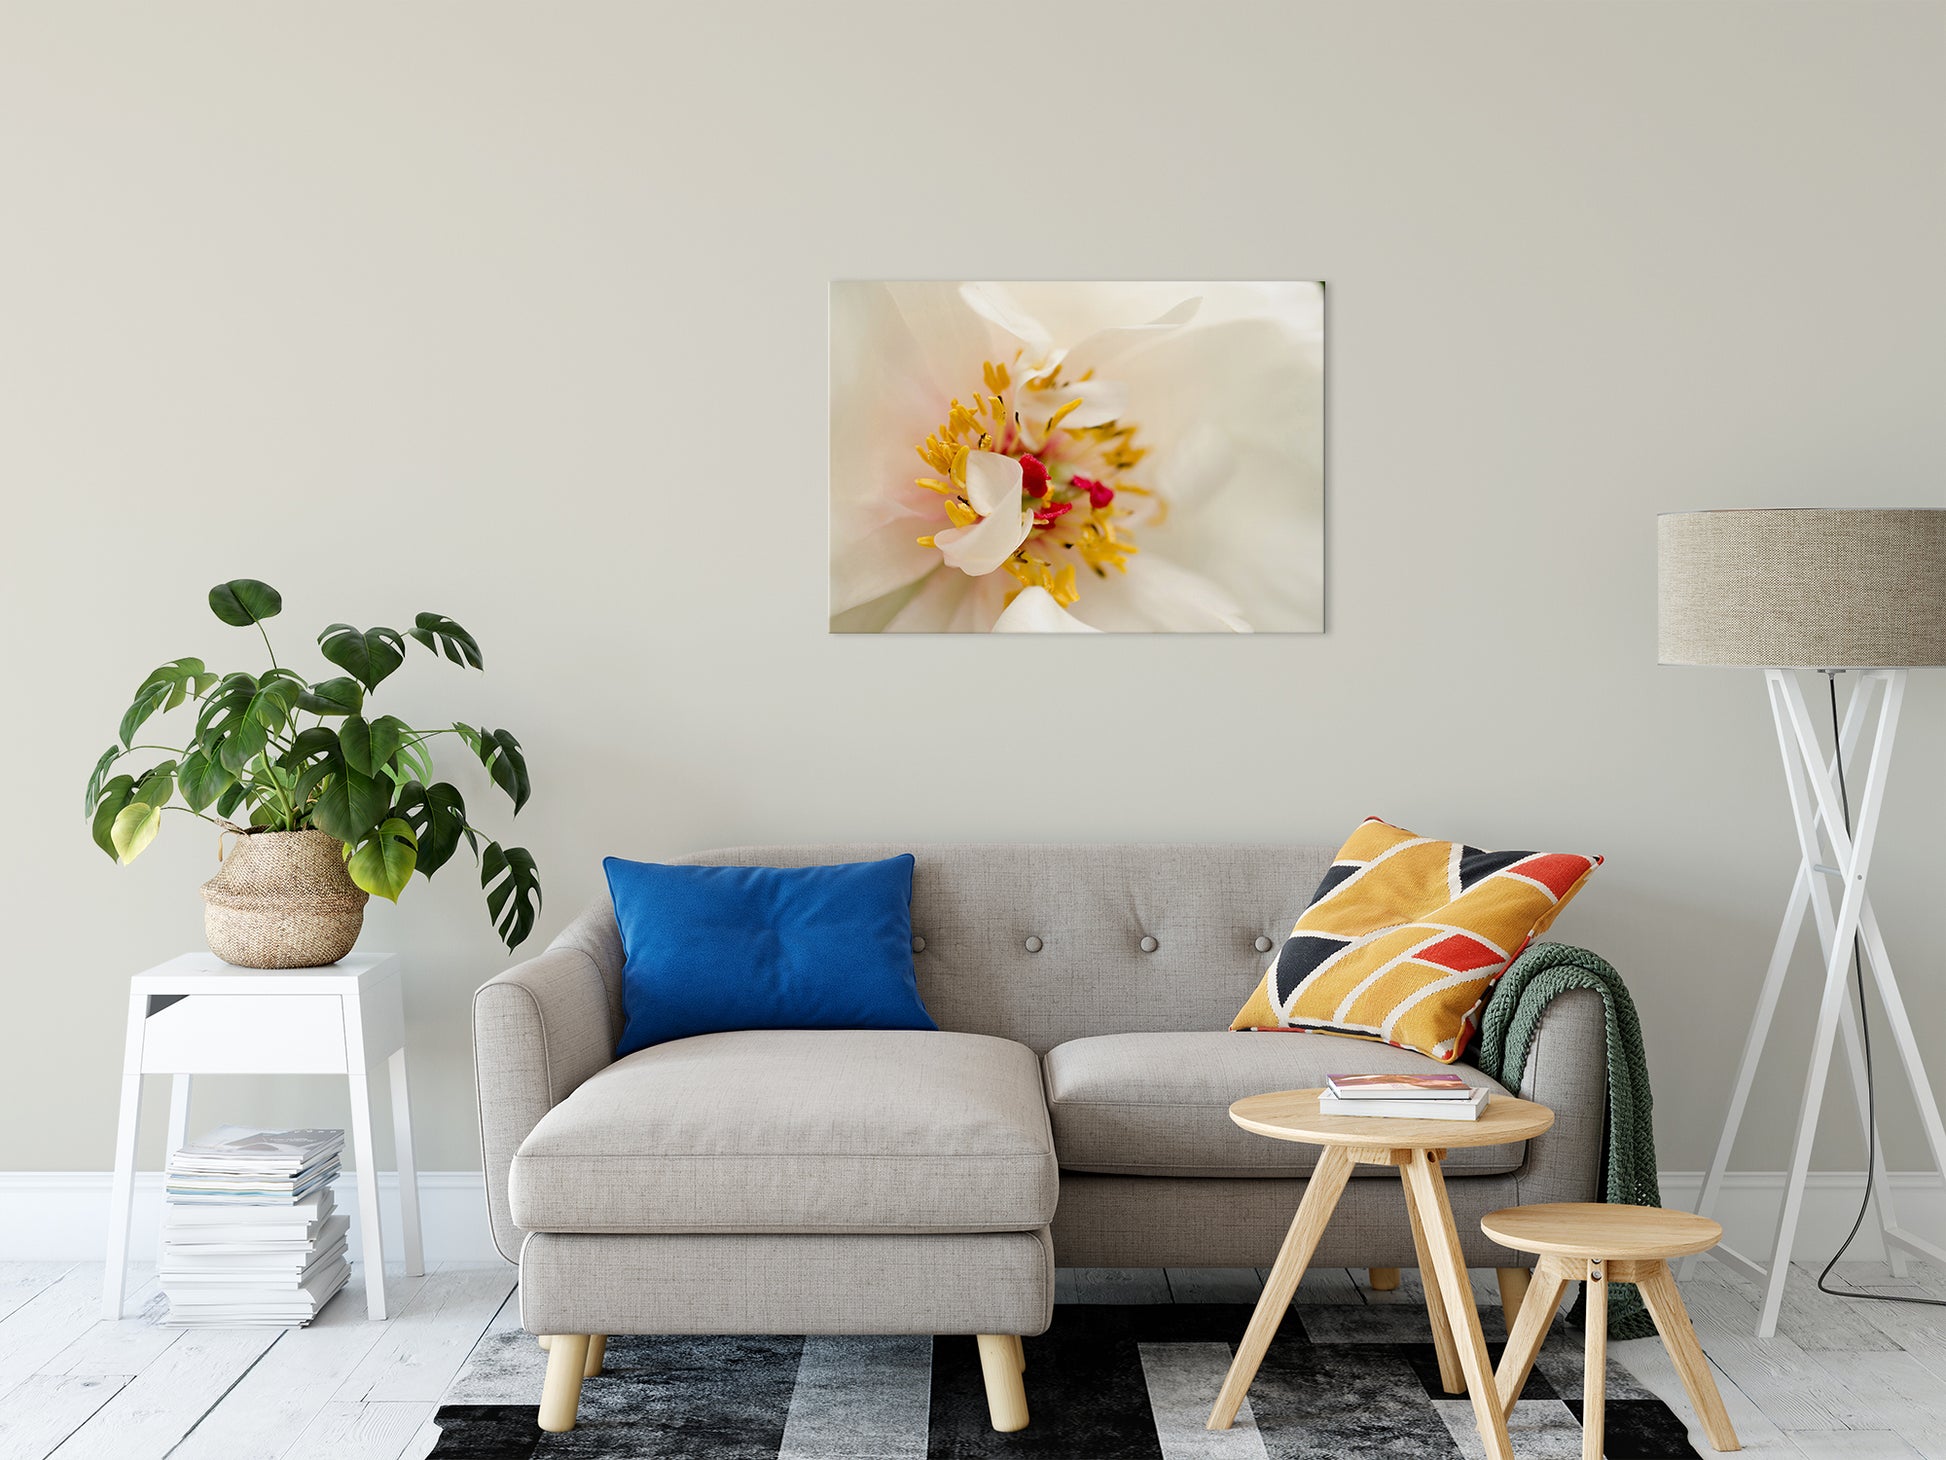 Eye of Peony Nature / Floral Photo Fine Art Canvas Wall Art Prints 24" x 36" - PIPAFINEART